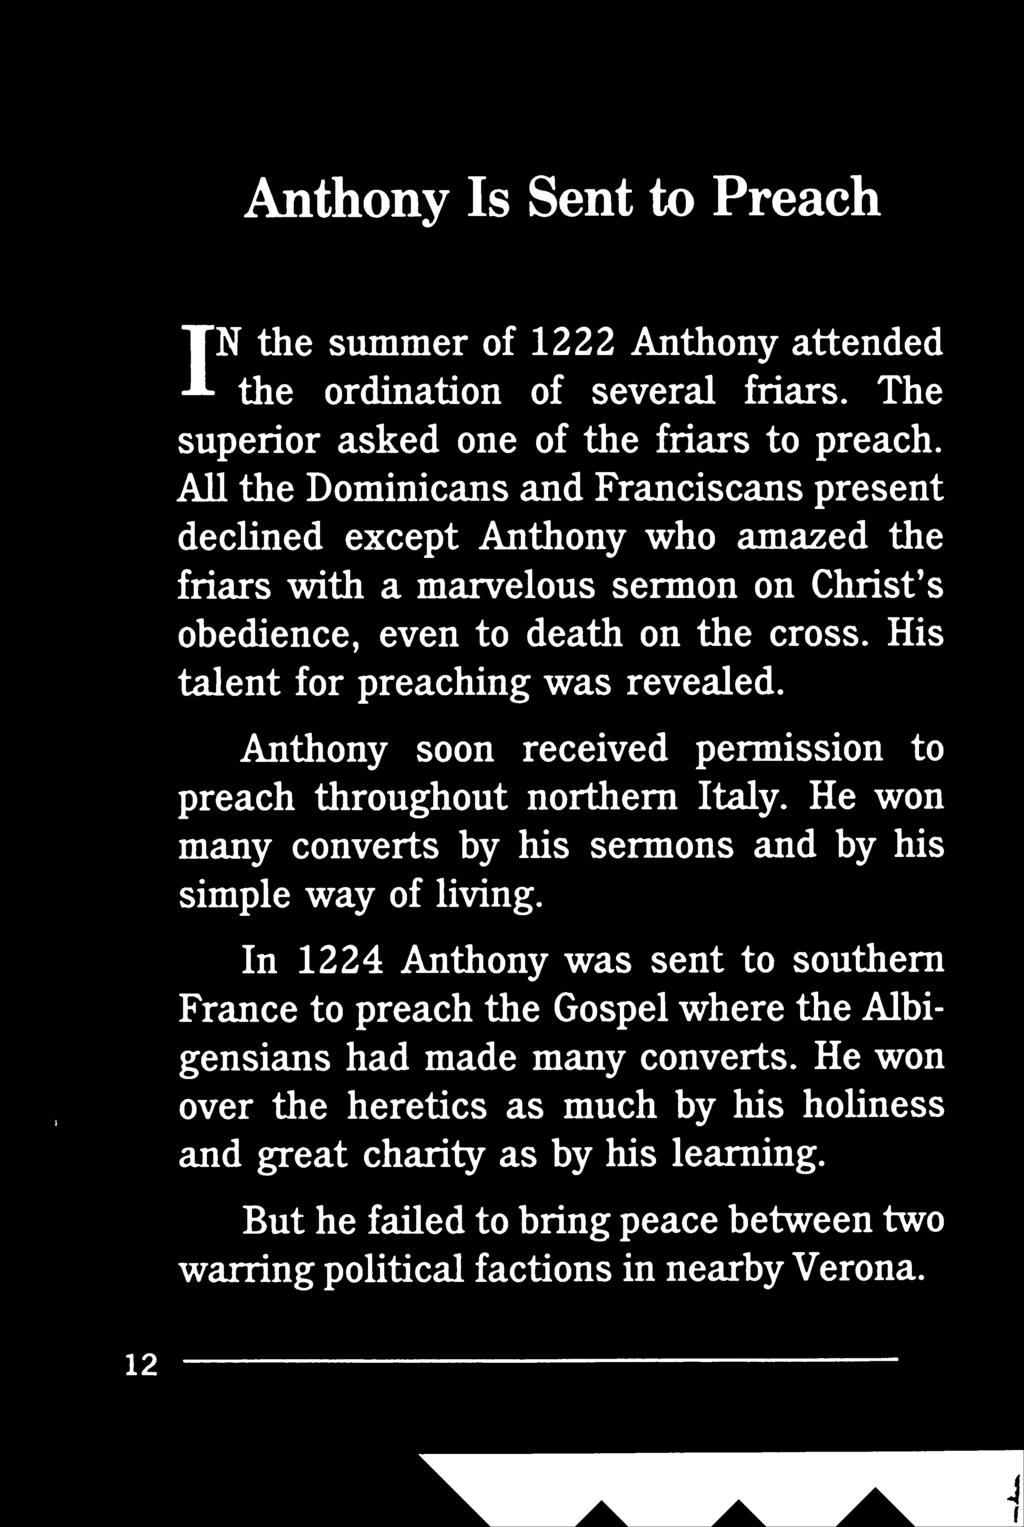 His talent for preaching was revealed. Anthony soon received permission to preach throughout northern Italy. many converts by his simple way of living.